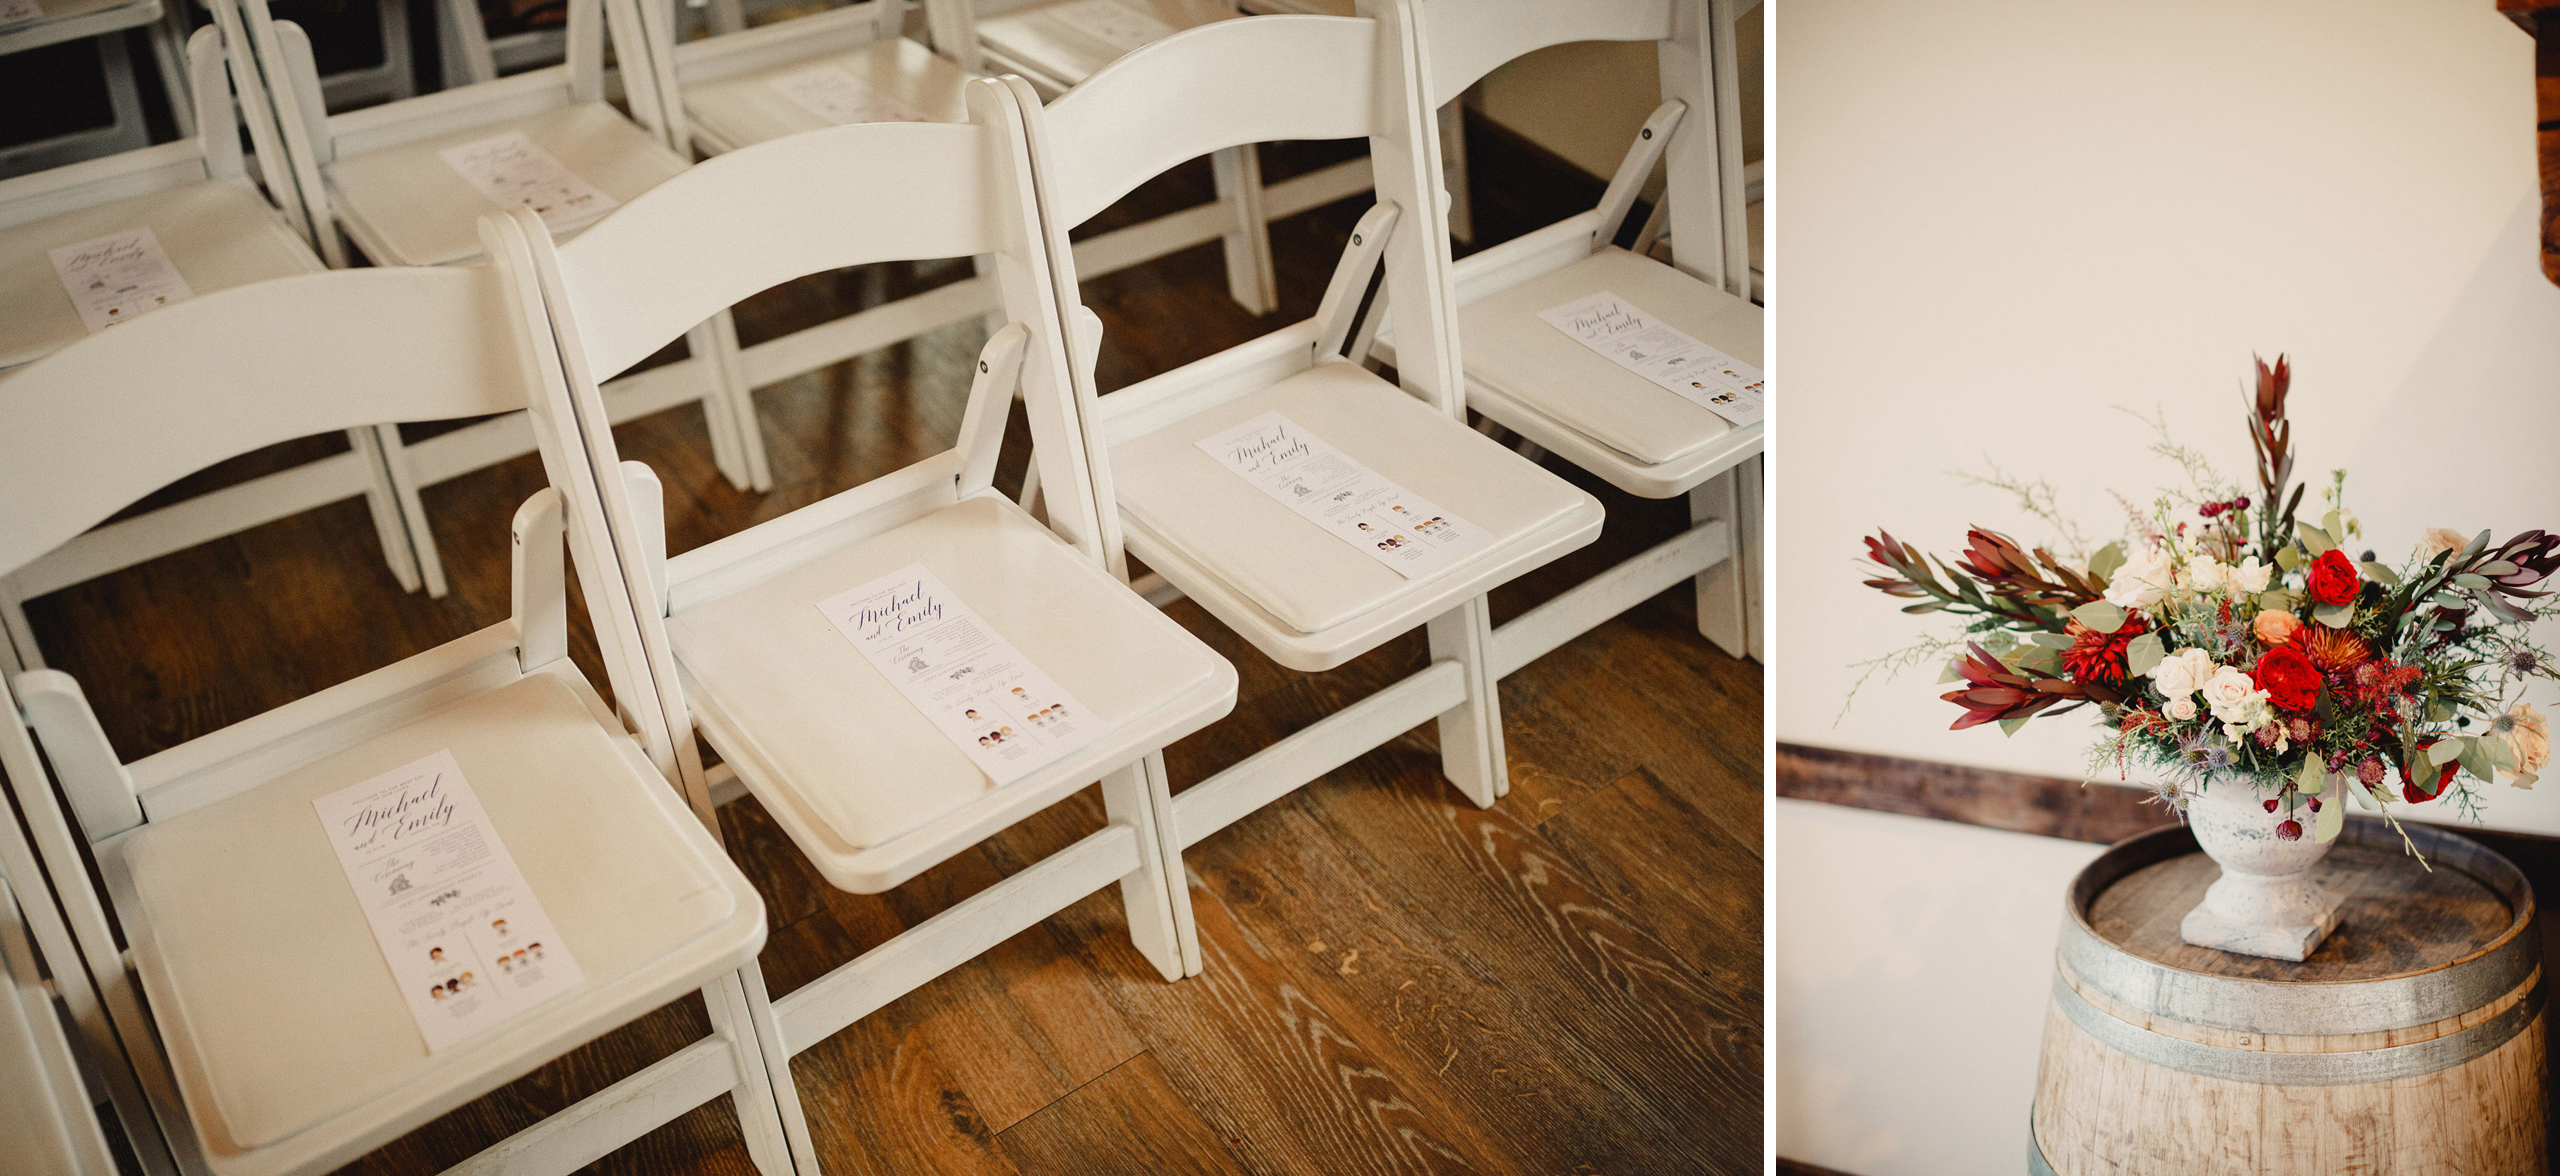 cave spring retreat building chairs white winter wedding